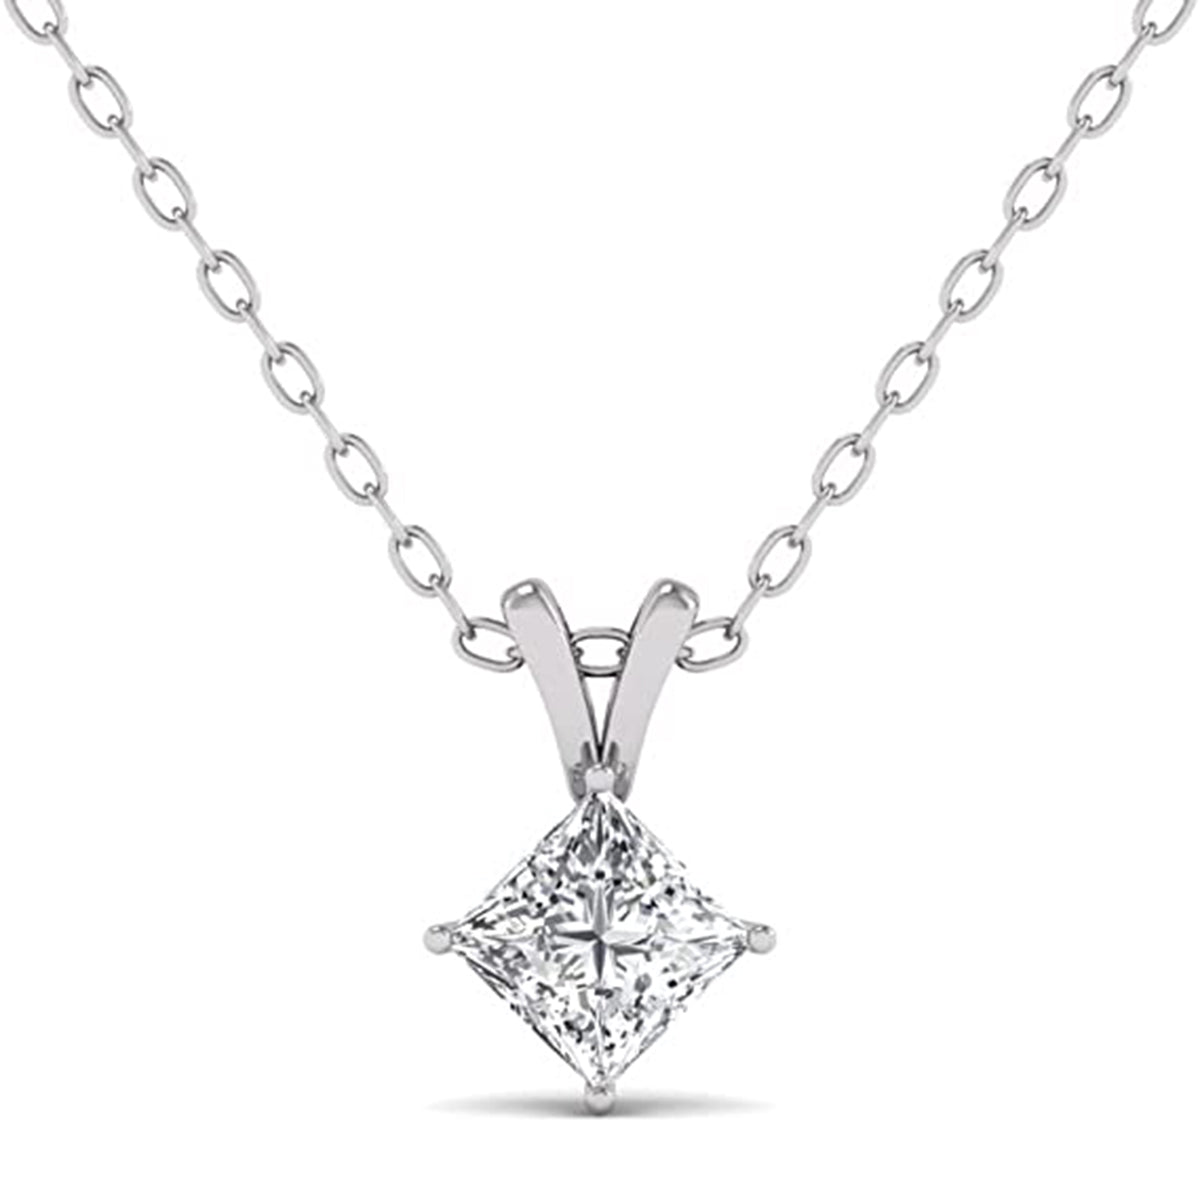 1/2 CARAT TW Princess Cut Natural Diamond 4-Prong Solitaire Pendant Available in 14K White Gold (J-K Color, I2-I3 Clarity)